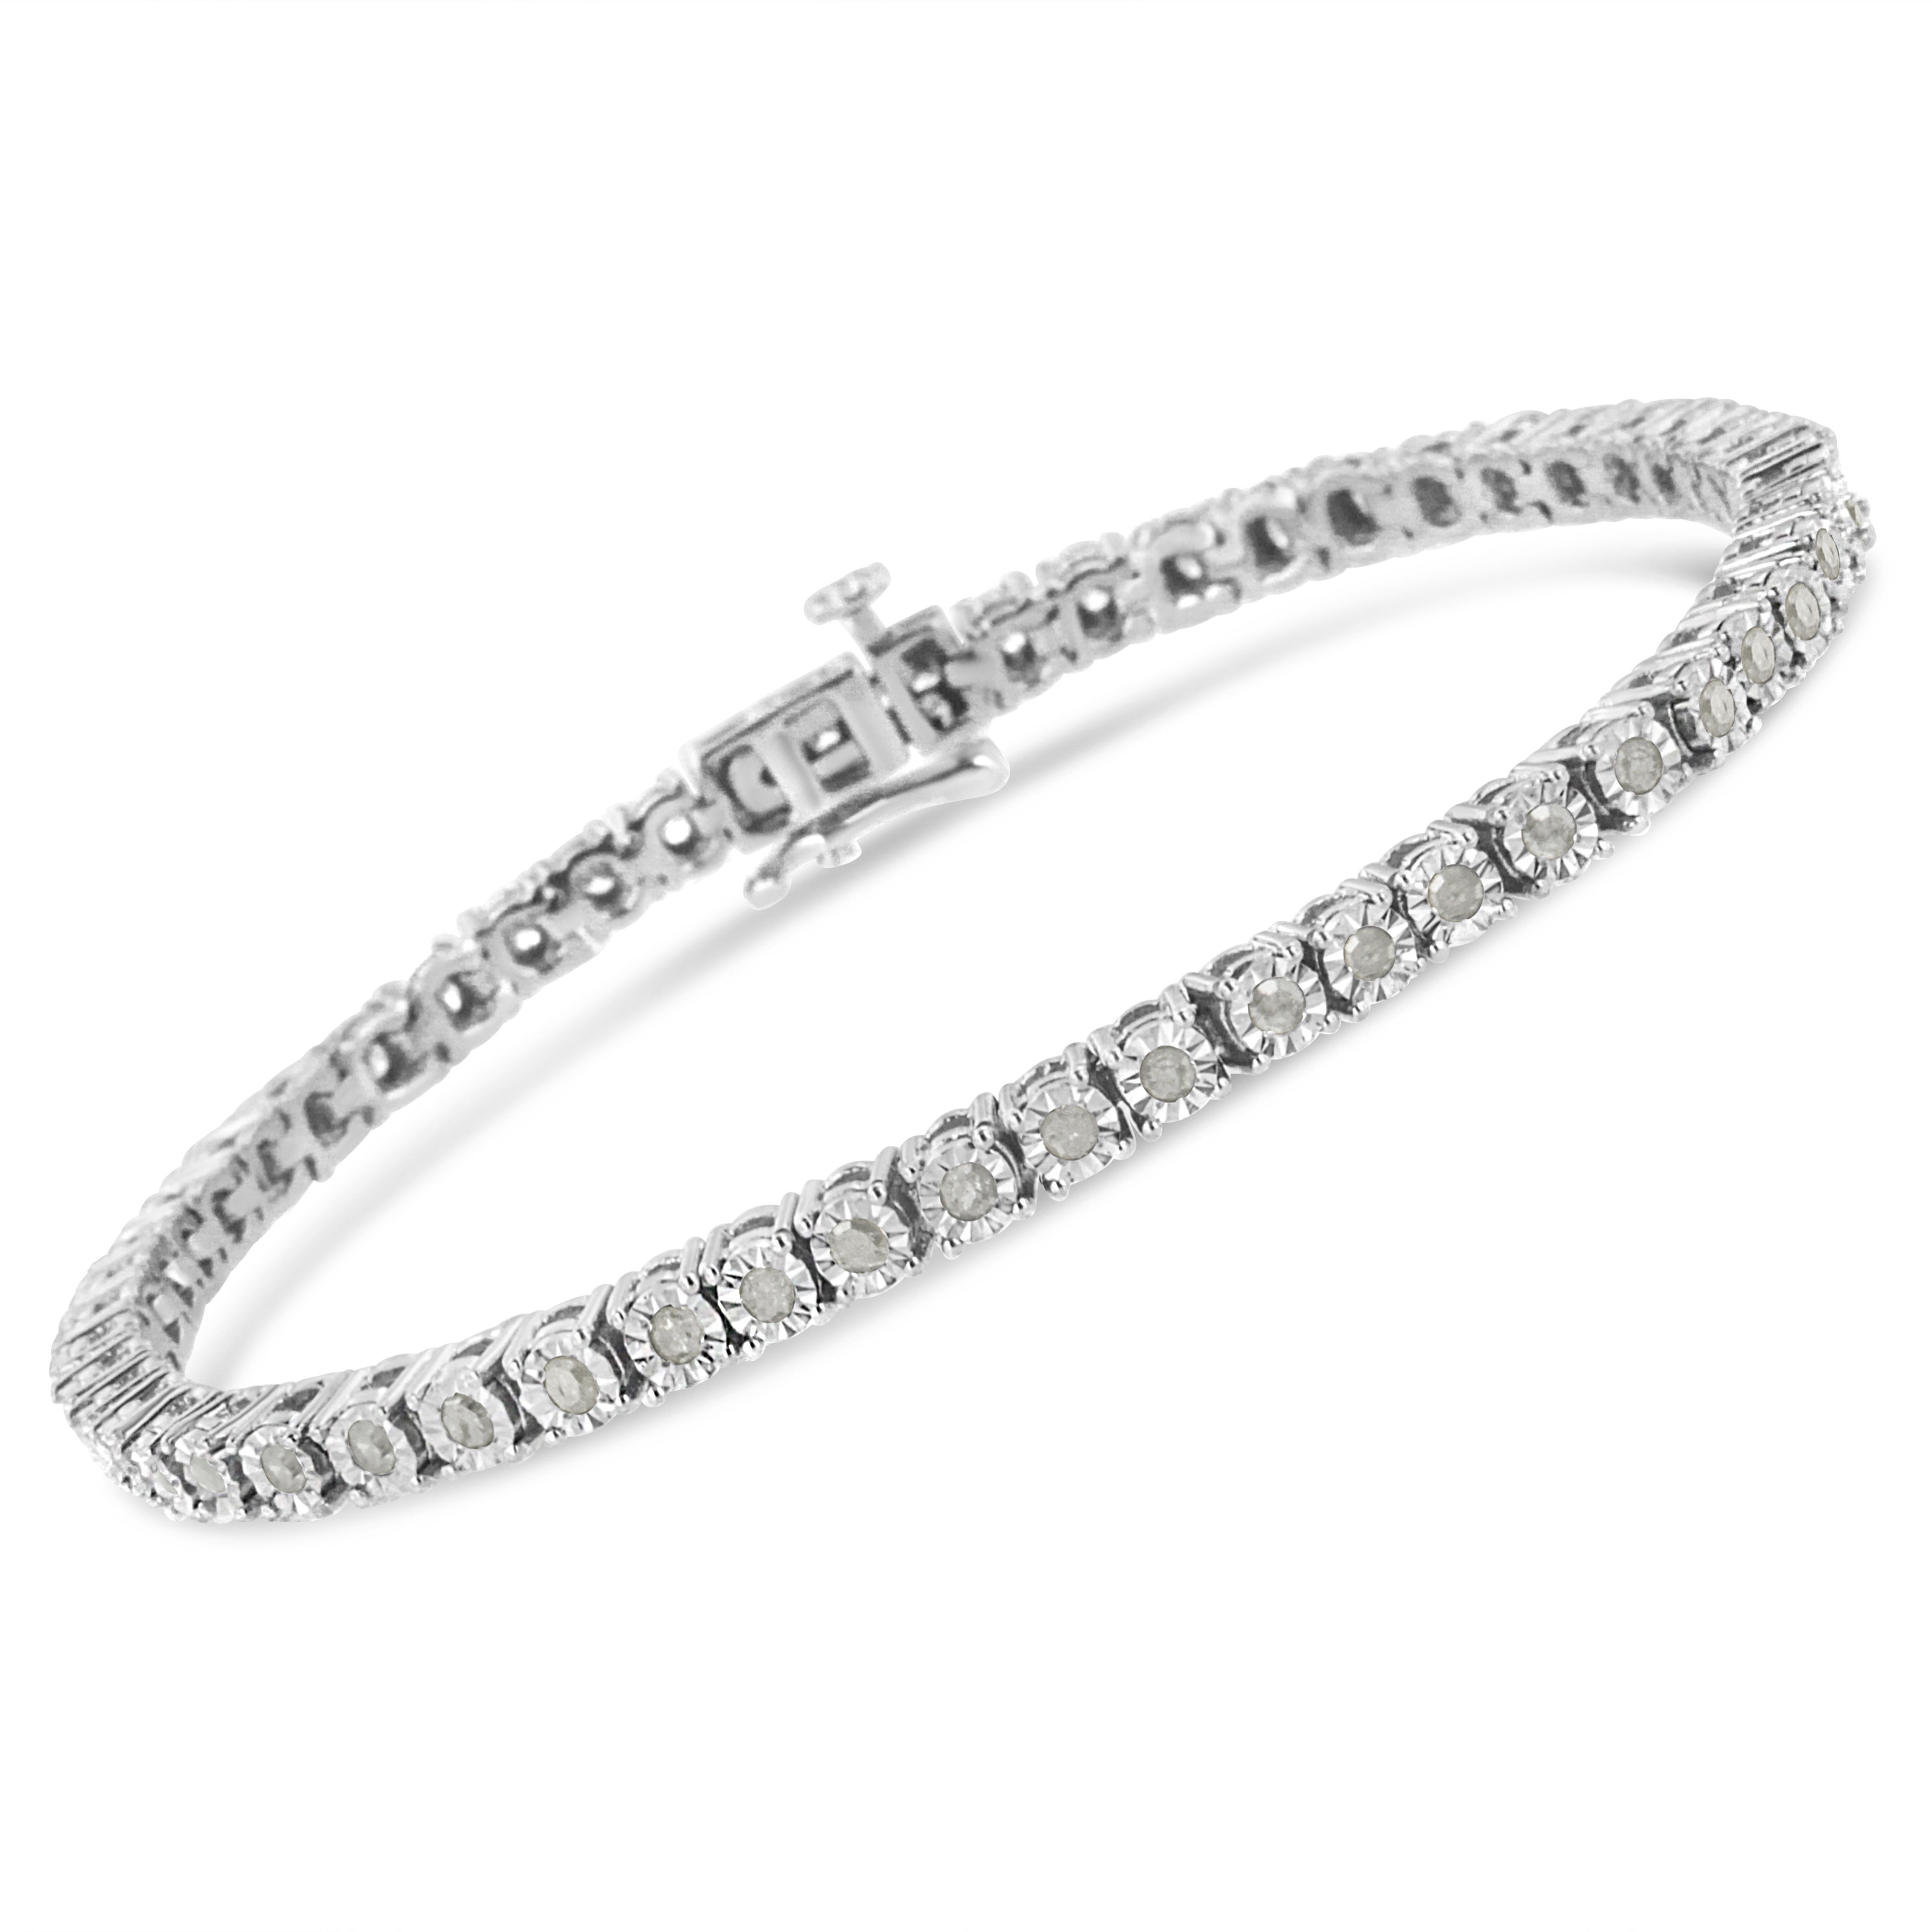 Fifty four, miracle set, promo quality, rose cut diamonds twinkle in this classic tennis bracelet. Crafted in polished sterling silver and featuring 1ct TDW of diamonds, this is a timeless design that you can wear to embellish any ensemble. Promo